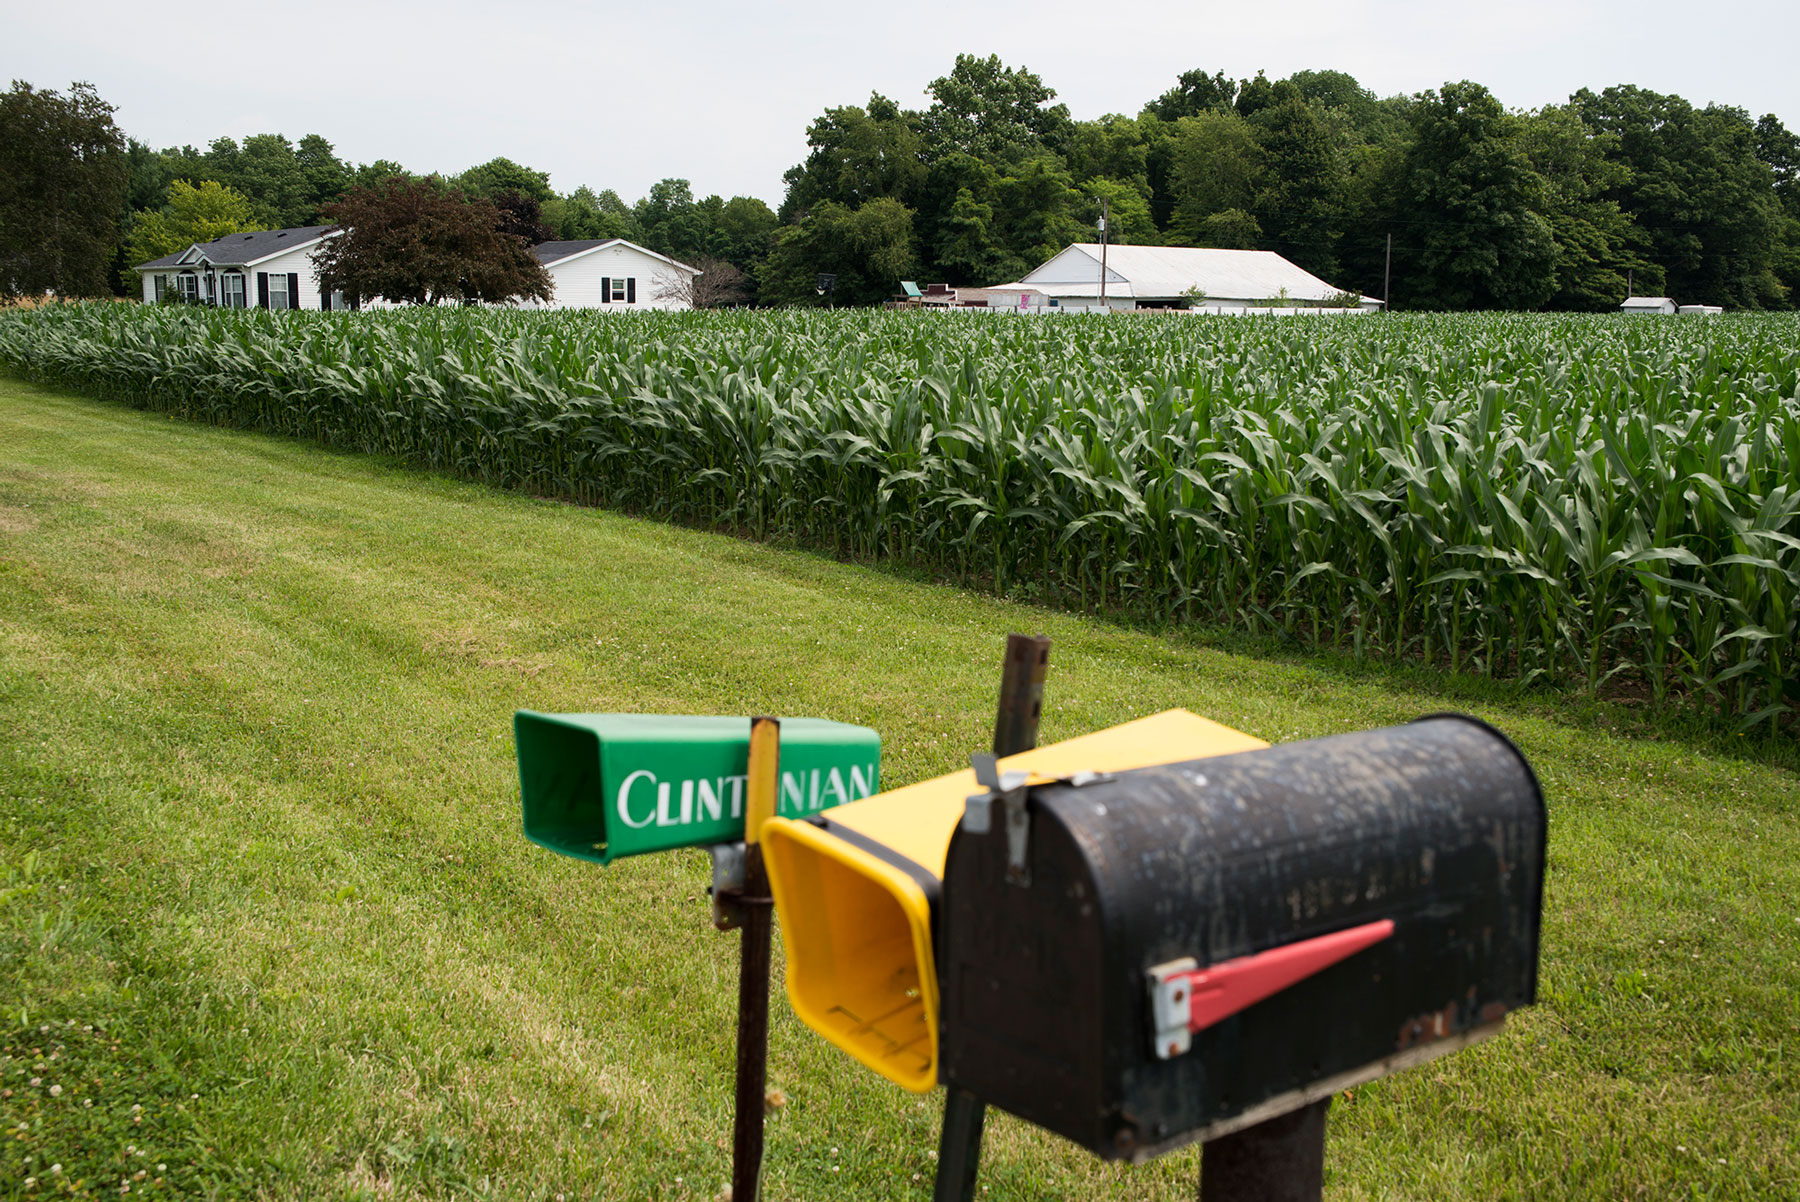 Mailboxes and a cornfield create a typical scene in Newport, Indiana. Just past the cornfield, several people are being baptized in a pastor’s pool, making this a special day for the town. (Roman Knertser/News21)